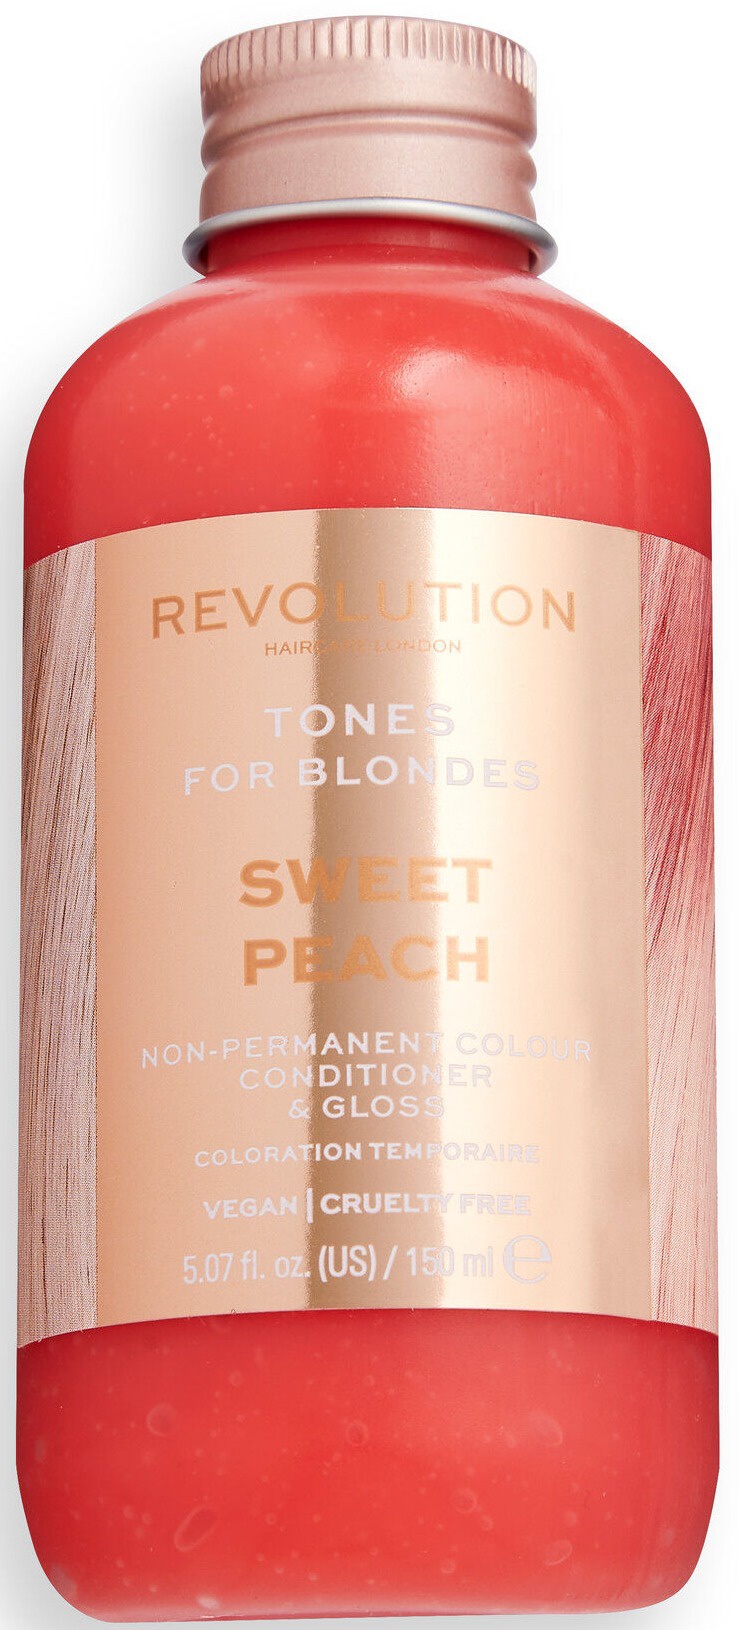 Revolution Haircare Tones For Blondes Sweet Peach